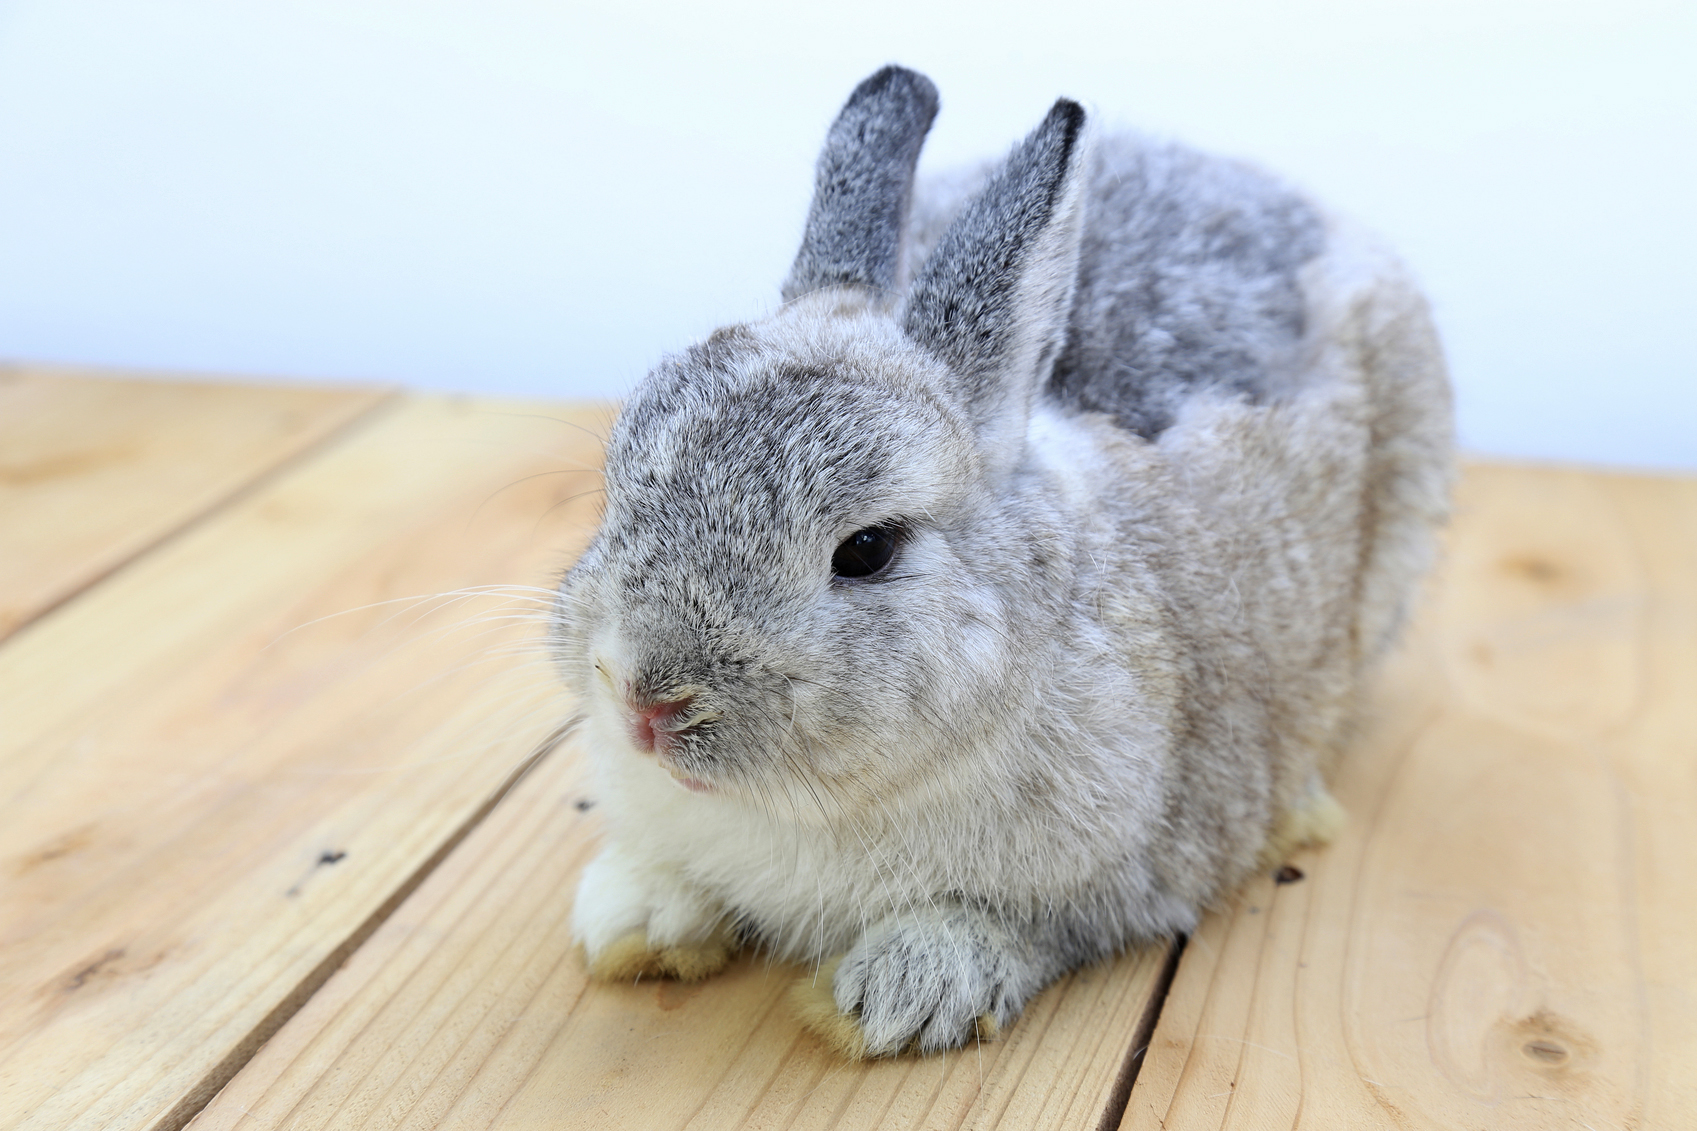 How long does a domestic dwarf bunny live?